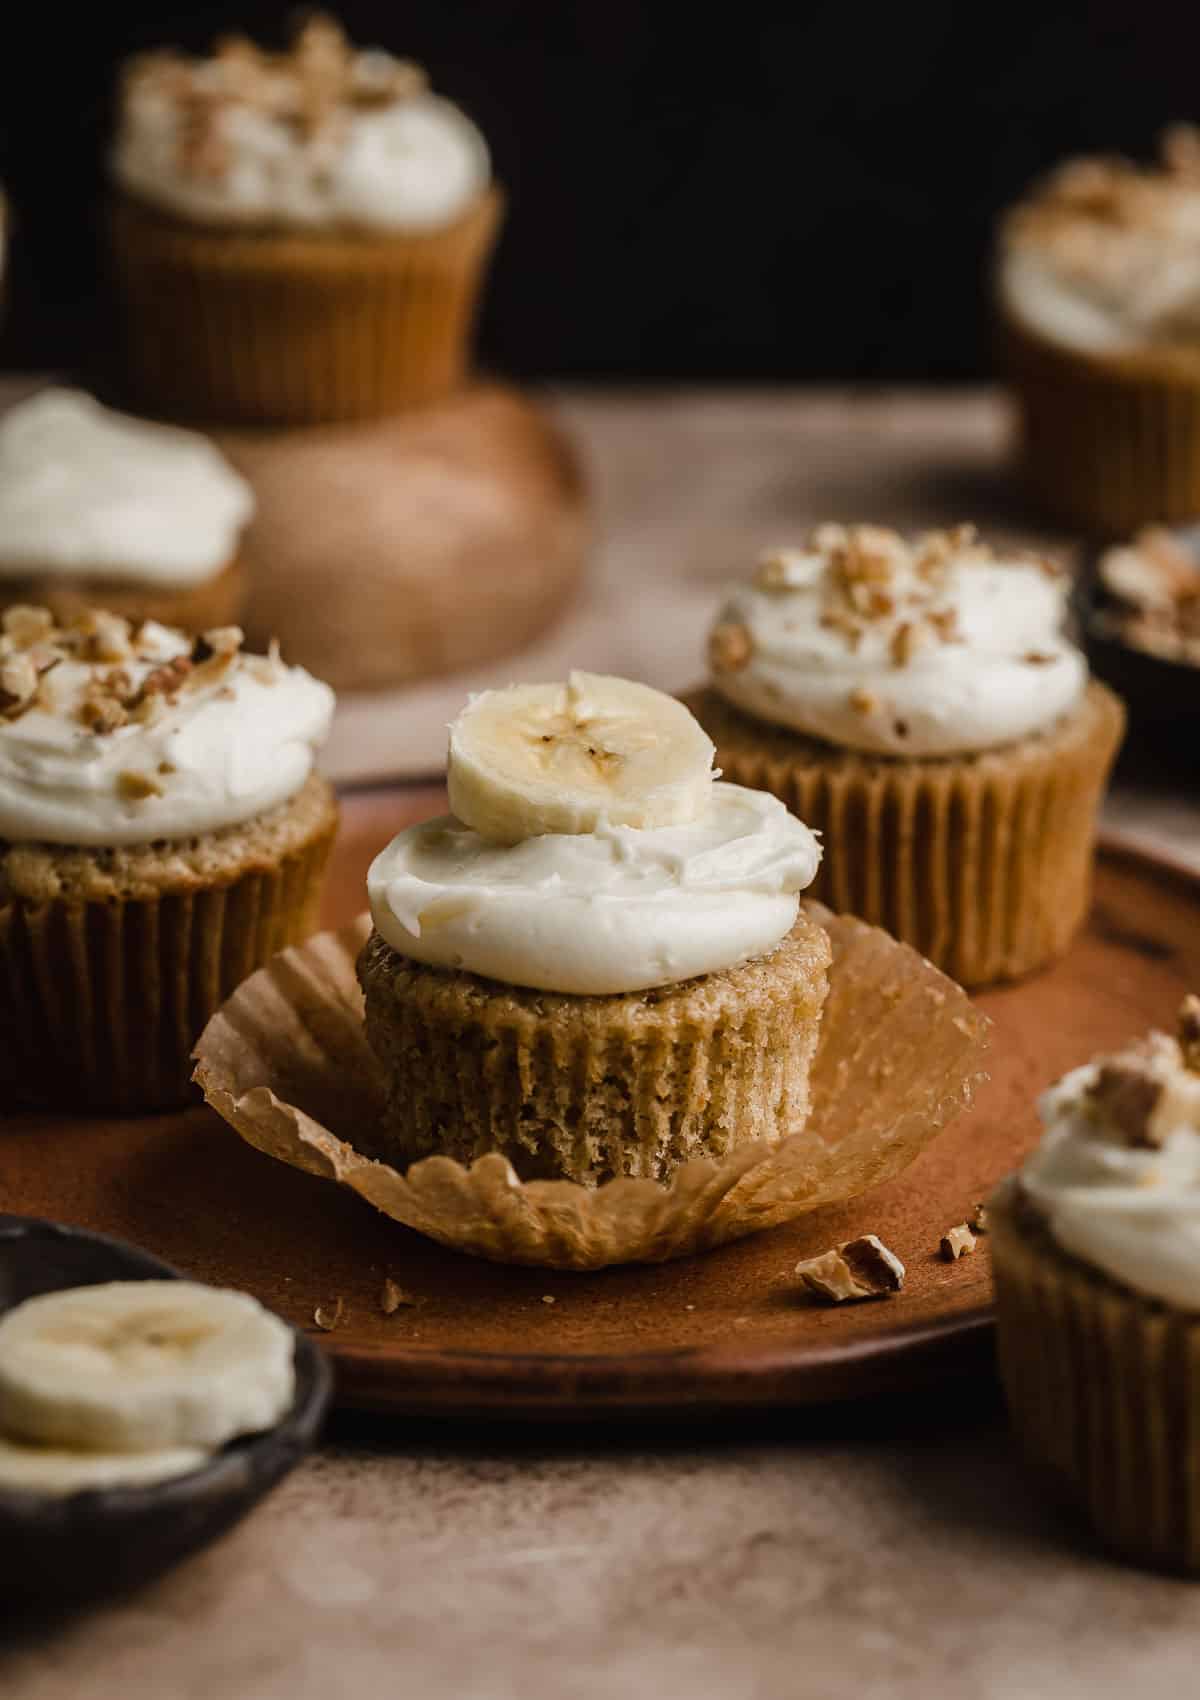 Banana Cupcakes on a brown plate against a dark brown background, with some of the cupcakes topped with chopped walnuts. 